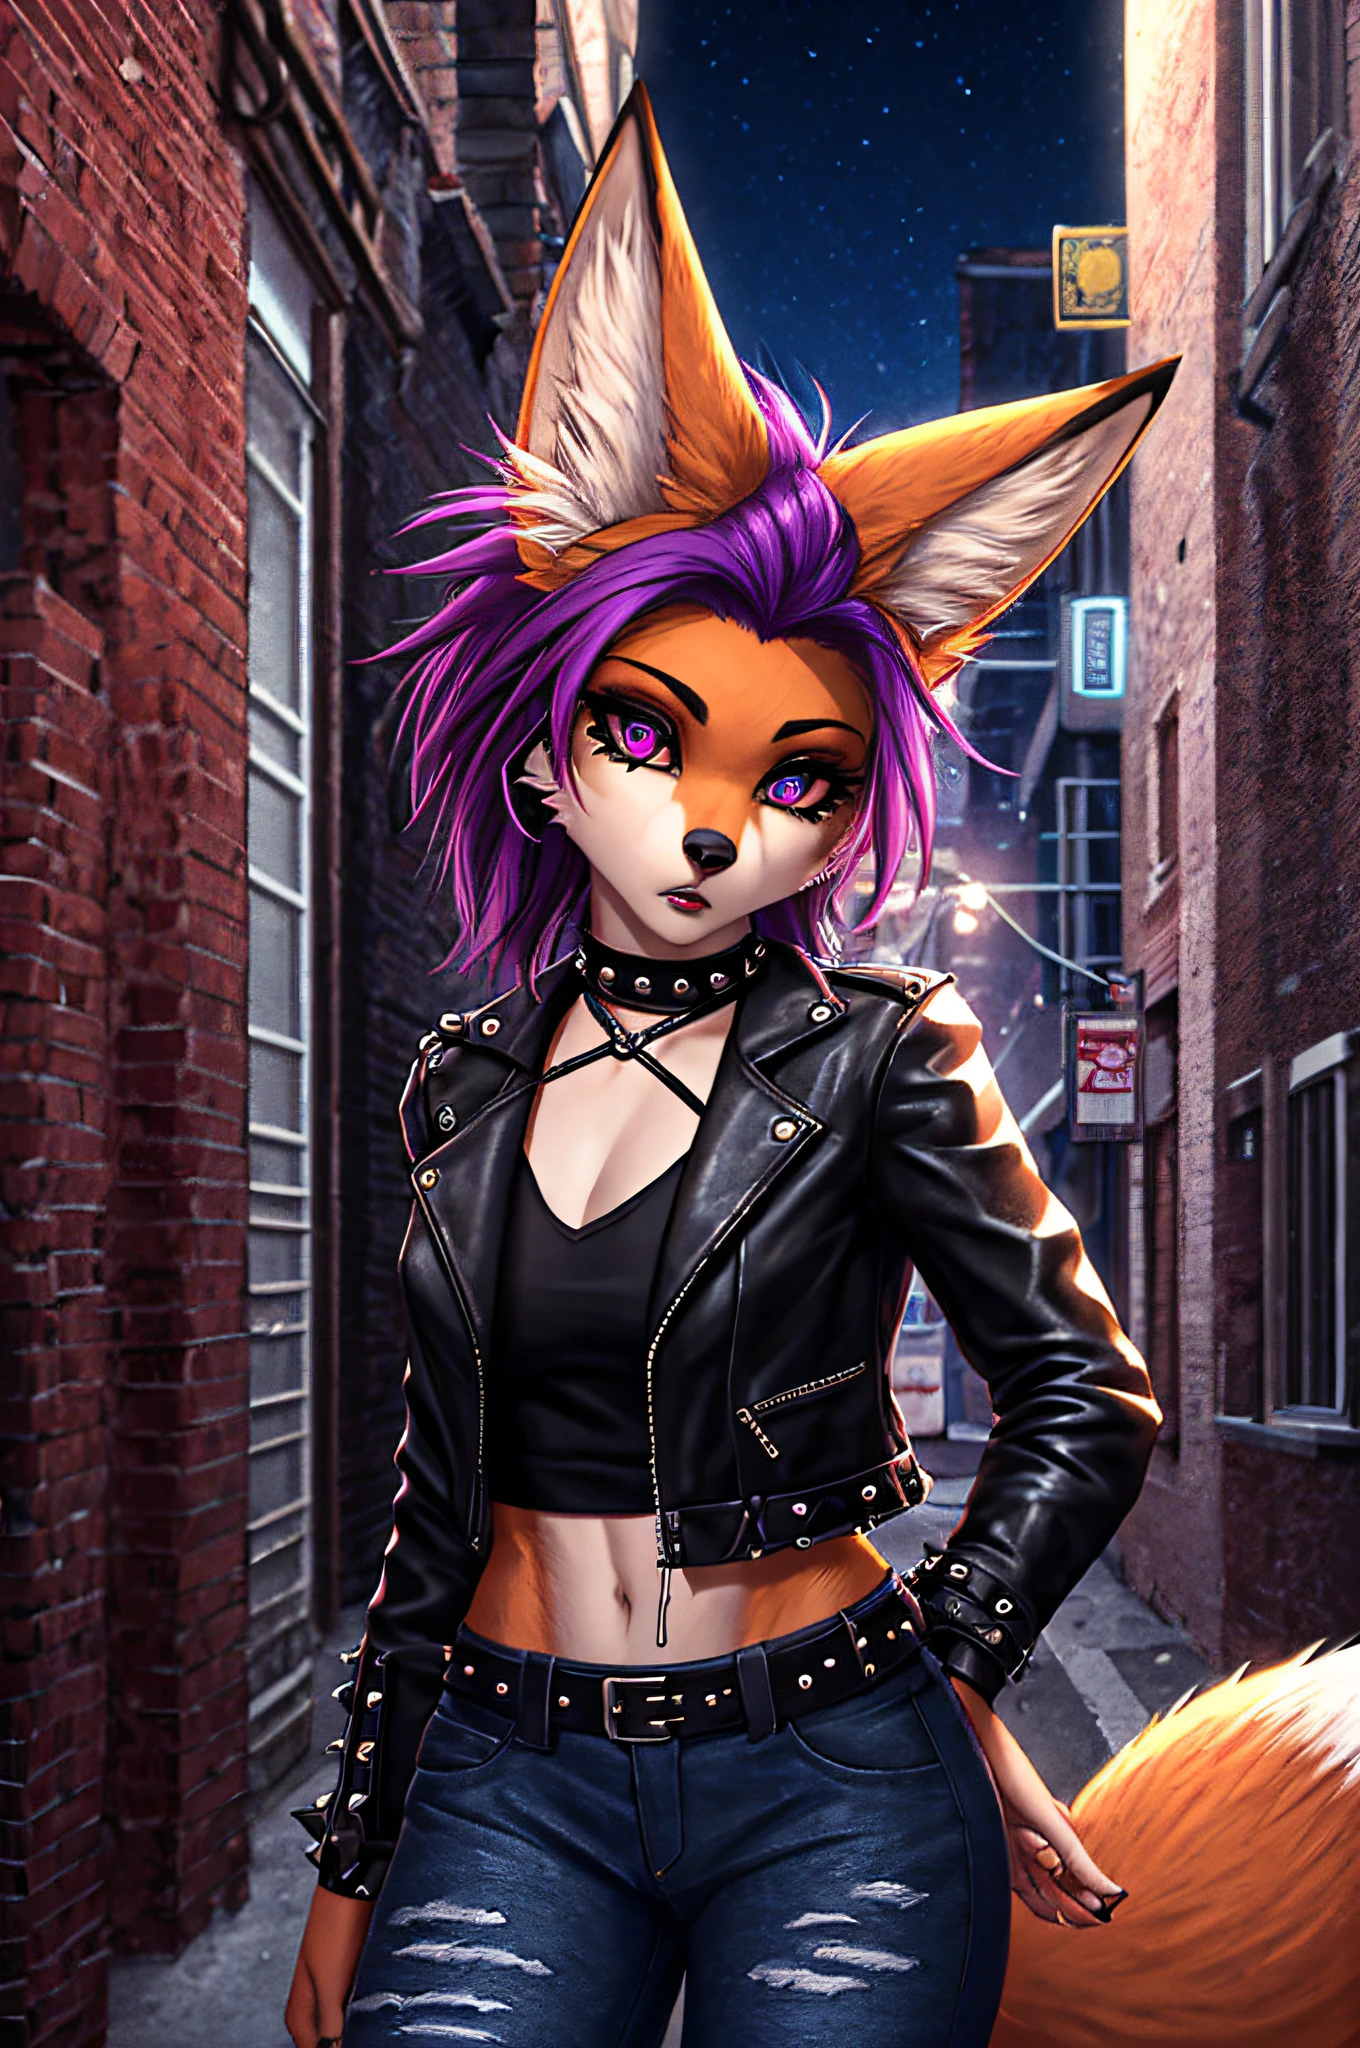 (ultra-realistic,highres,8k,best quality:1.2),vivid colors,beautiful detailed eyes,long eyelashes,fox girl,((fox snout,fox ears,orange fur,punk hair,goth style)),dark makeup,fierce expression,wild hair,earrings,leather jacket,distressed jeans,studded belt,combat boots,grungy background,edgy atmosphere,urban setting,nighttime lighting, purple highlights in hair